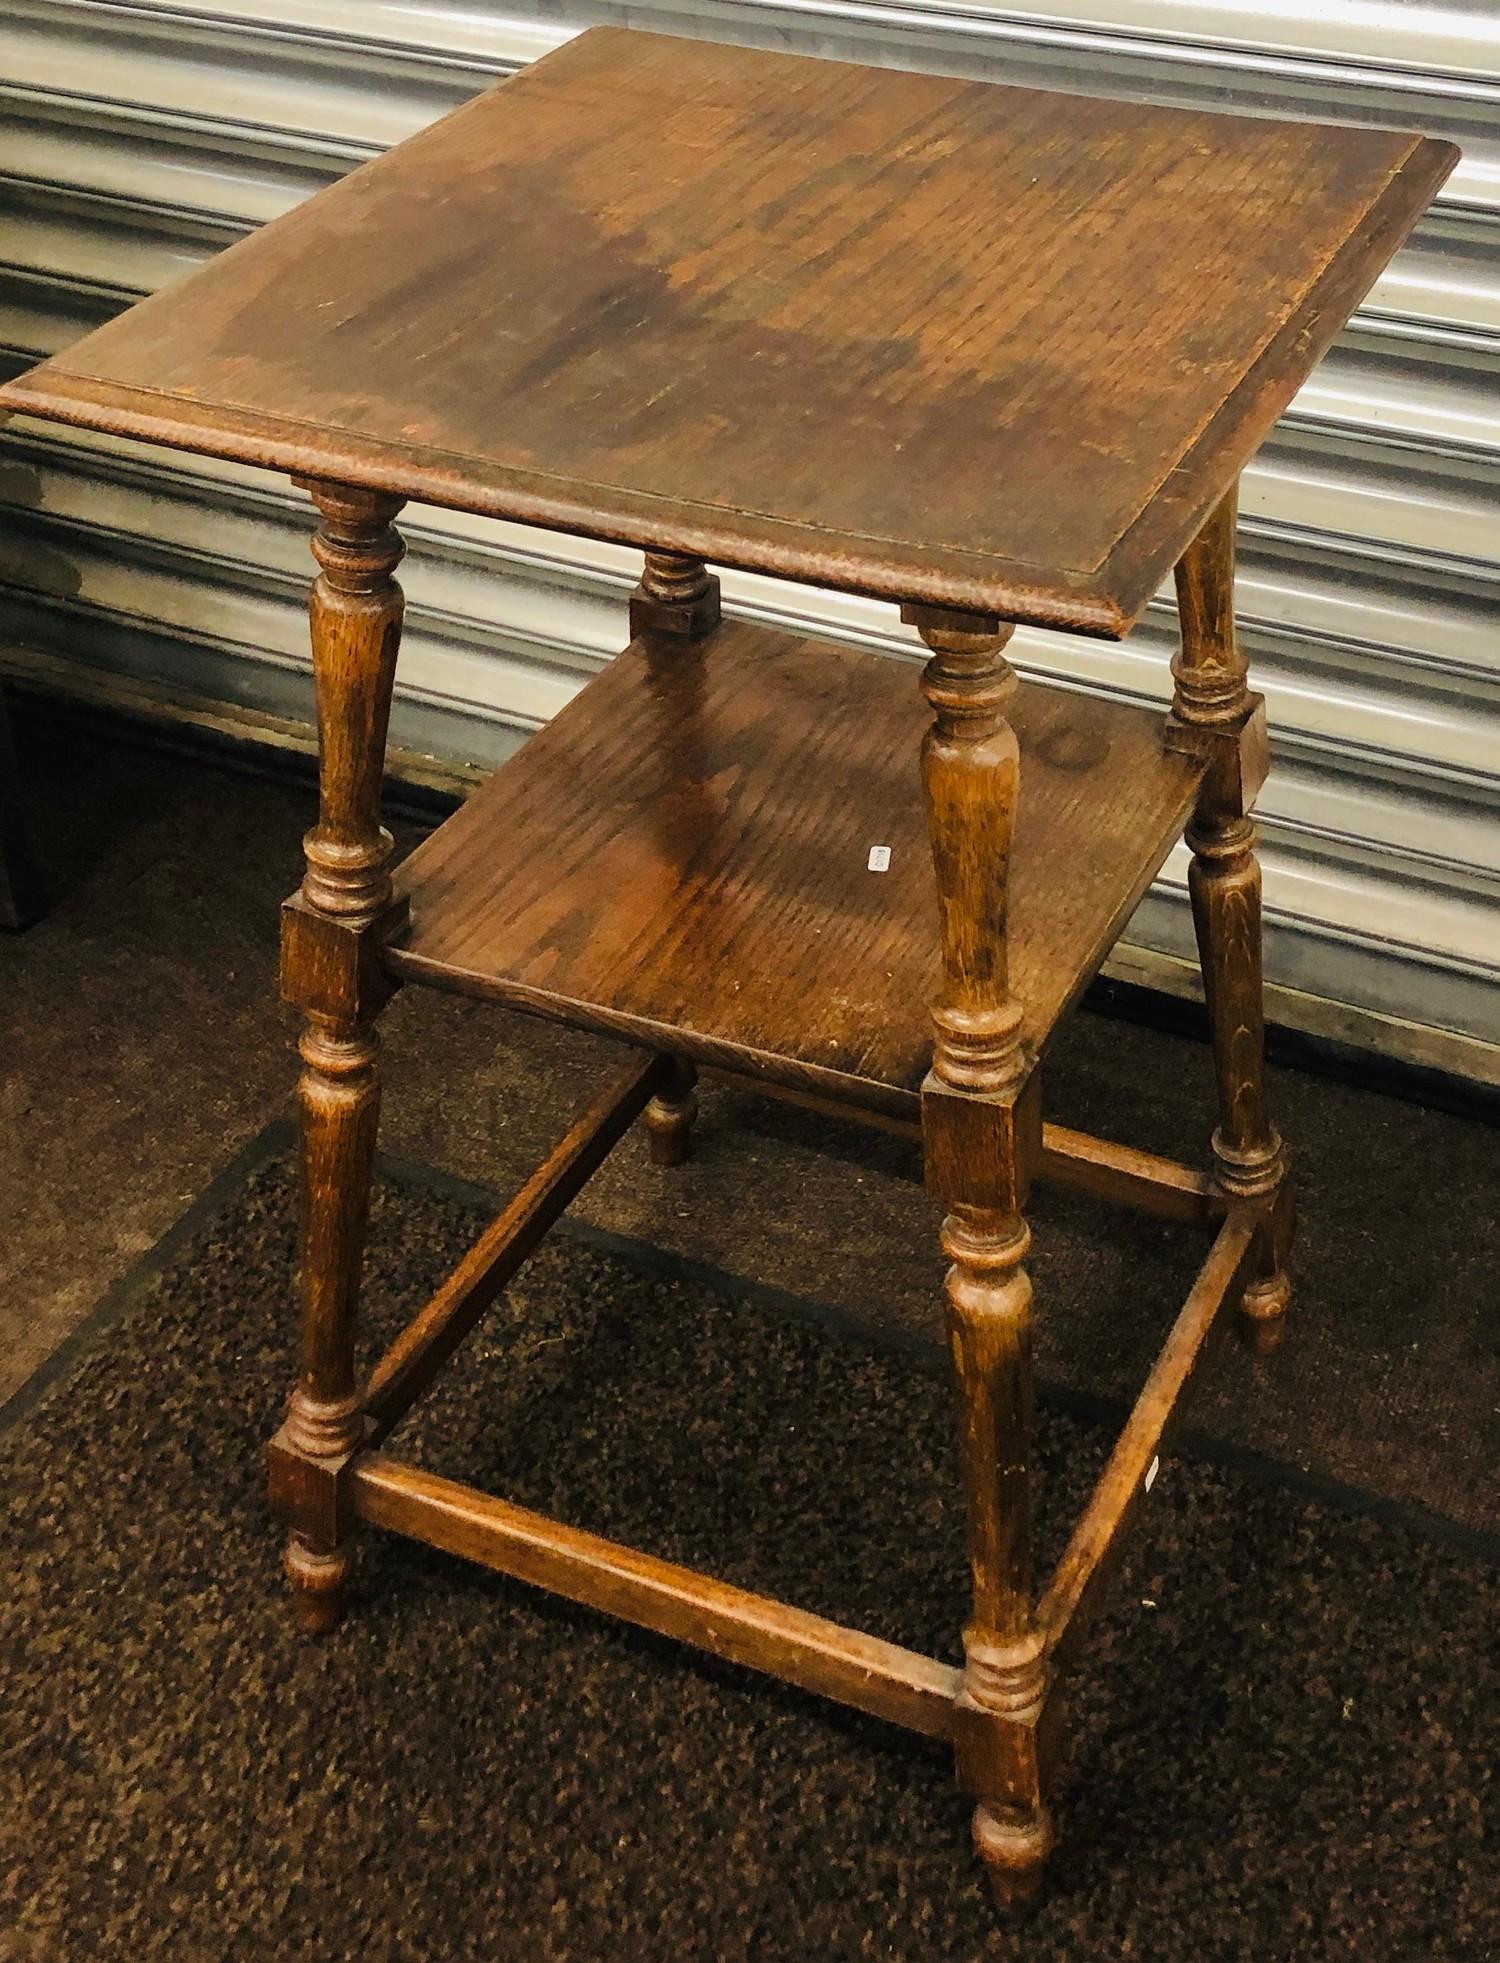 Solid oak two tier Edwardian table, overall height: 29 inches, width/ depth 19 inches - Image 2 of 2